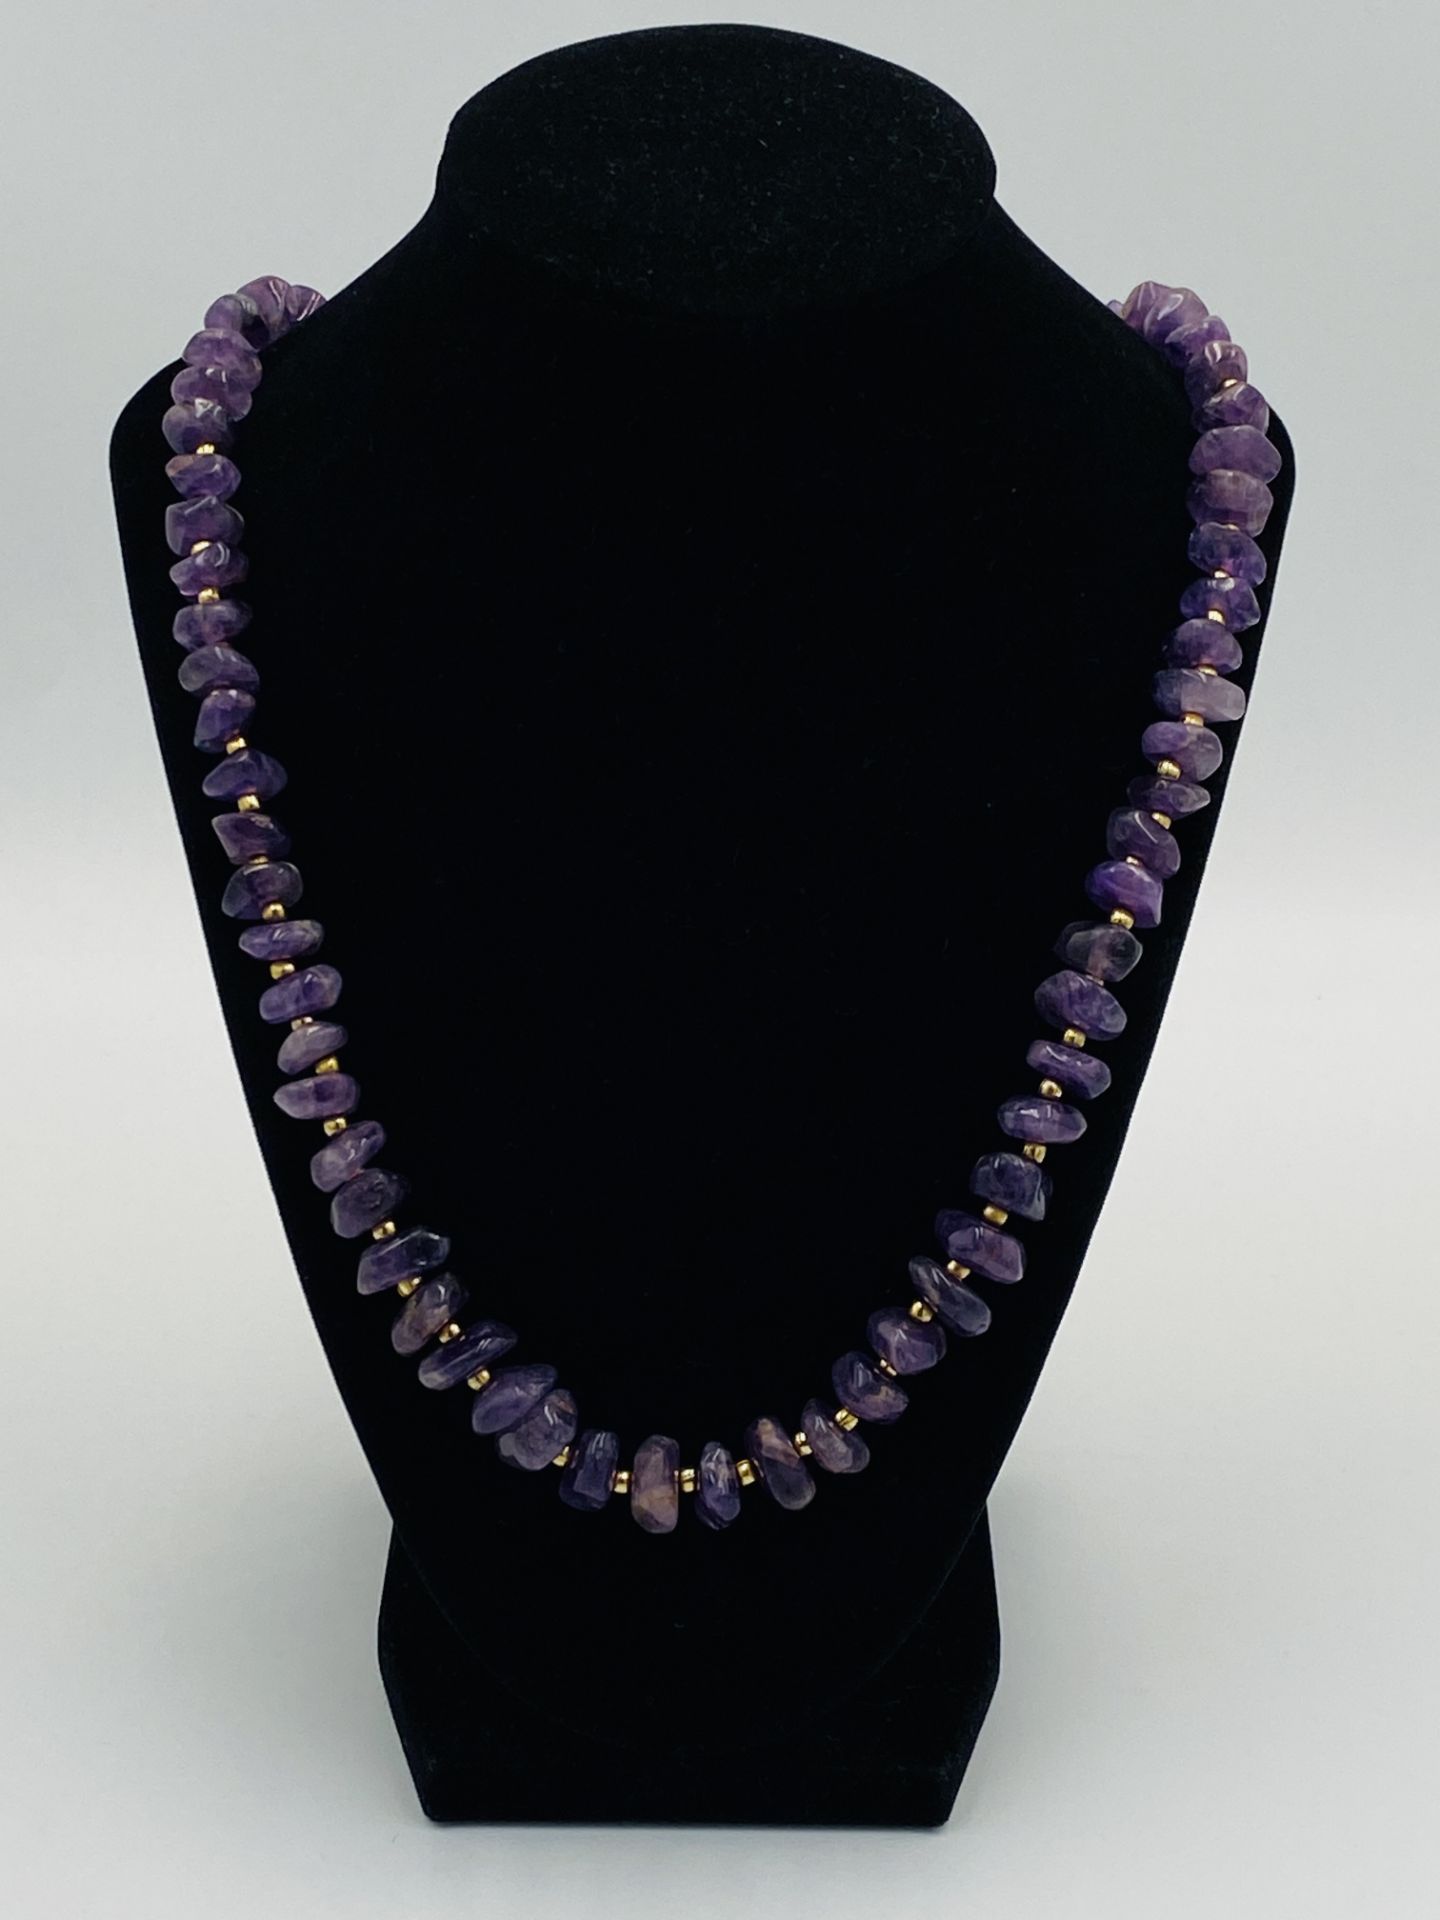 Four agate bead necklaces - Image 6 of 6